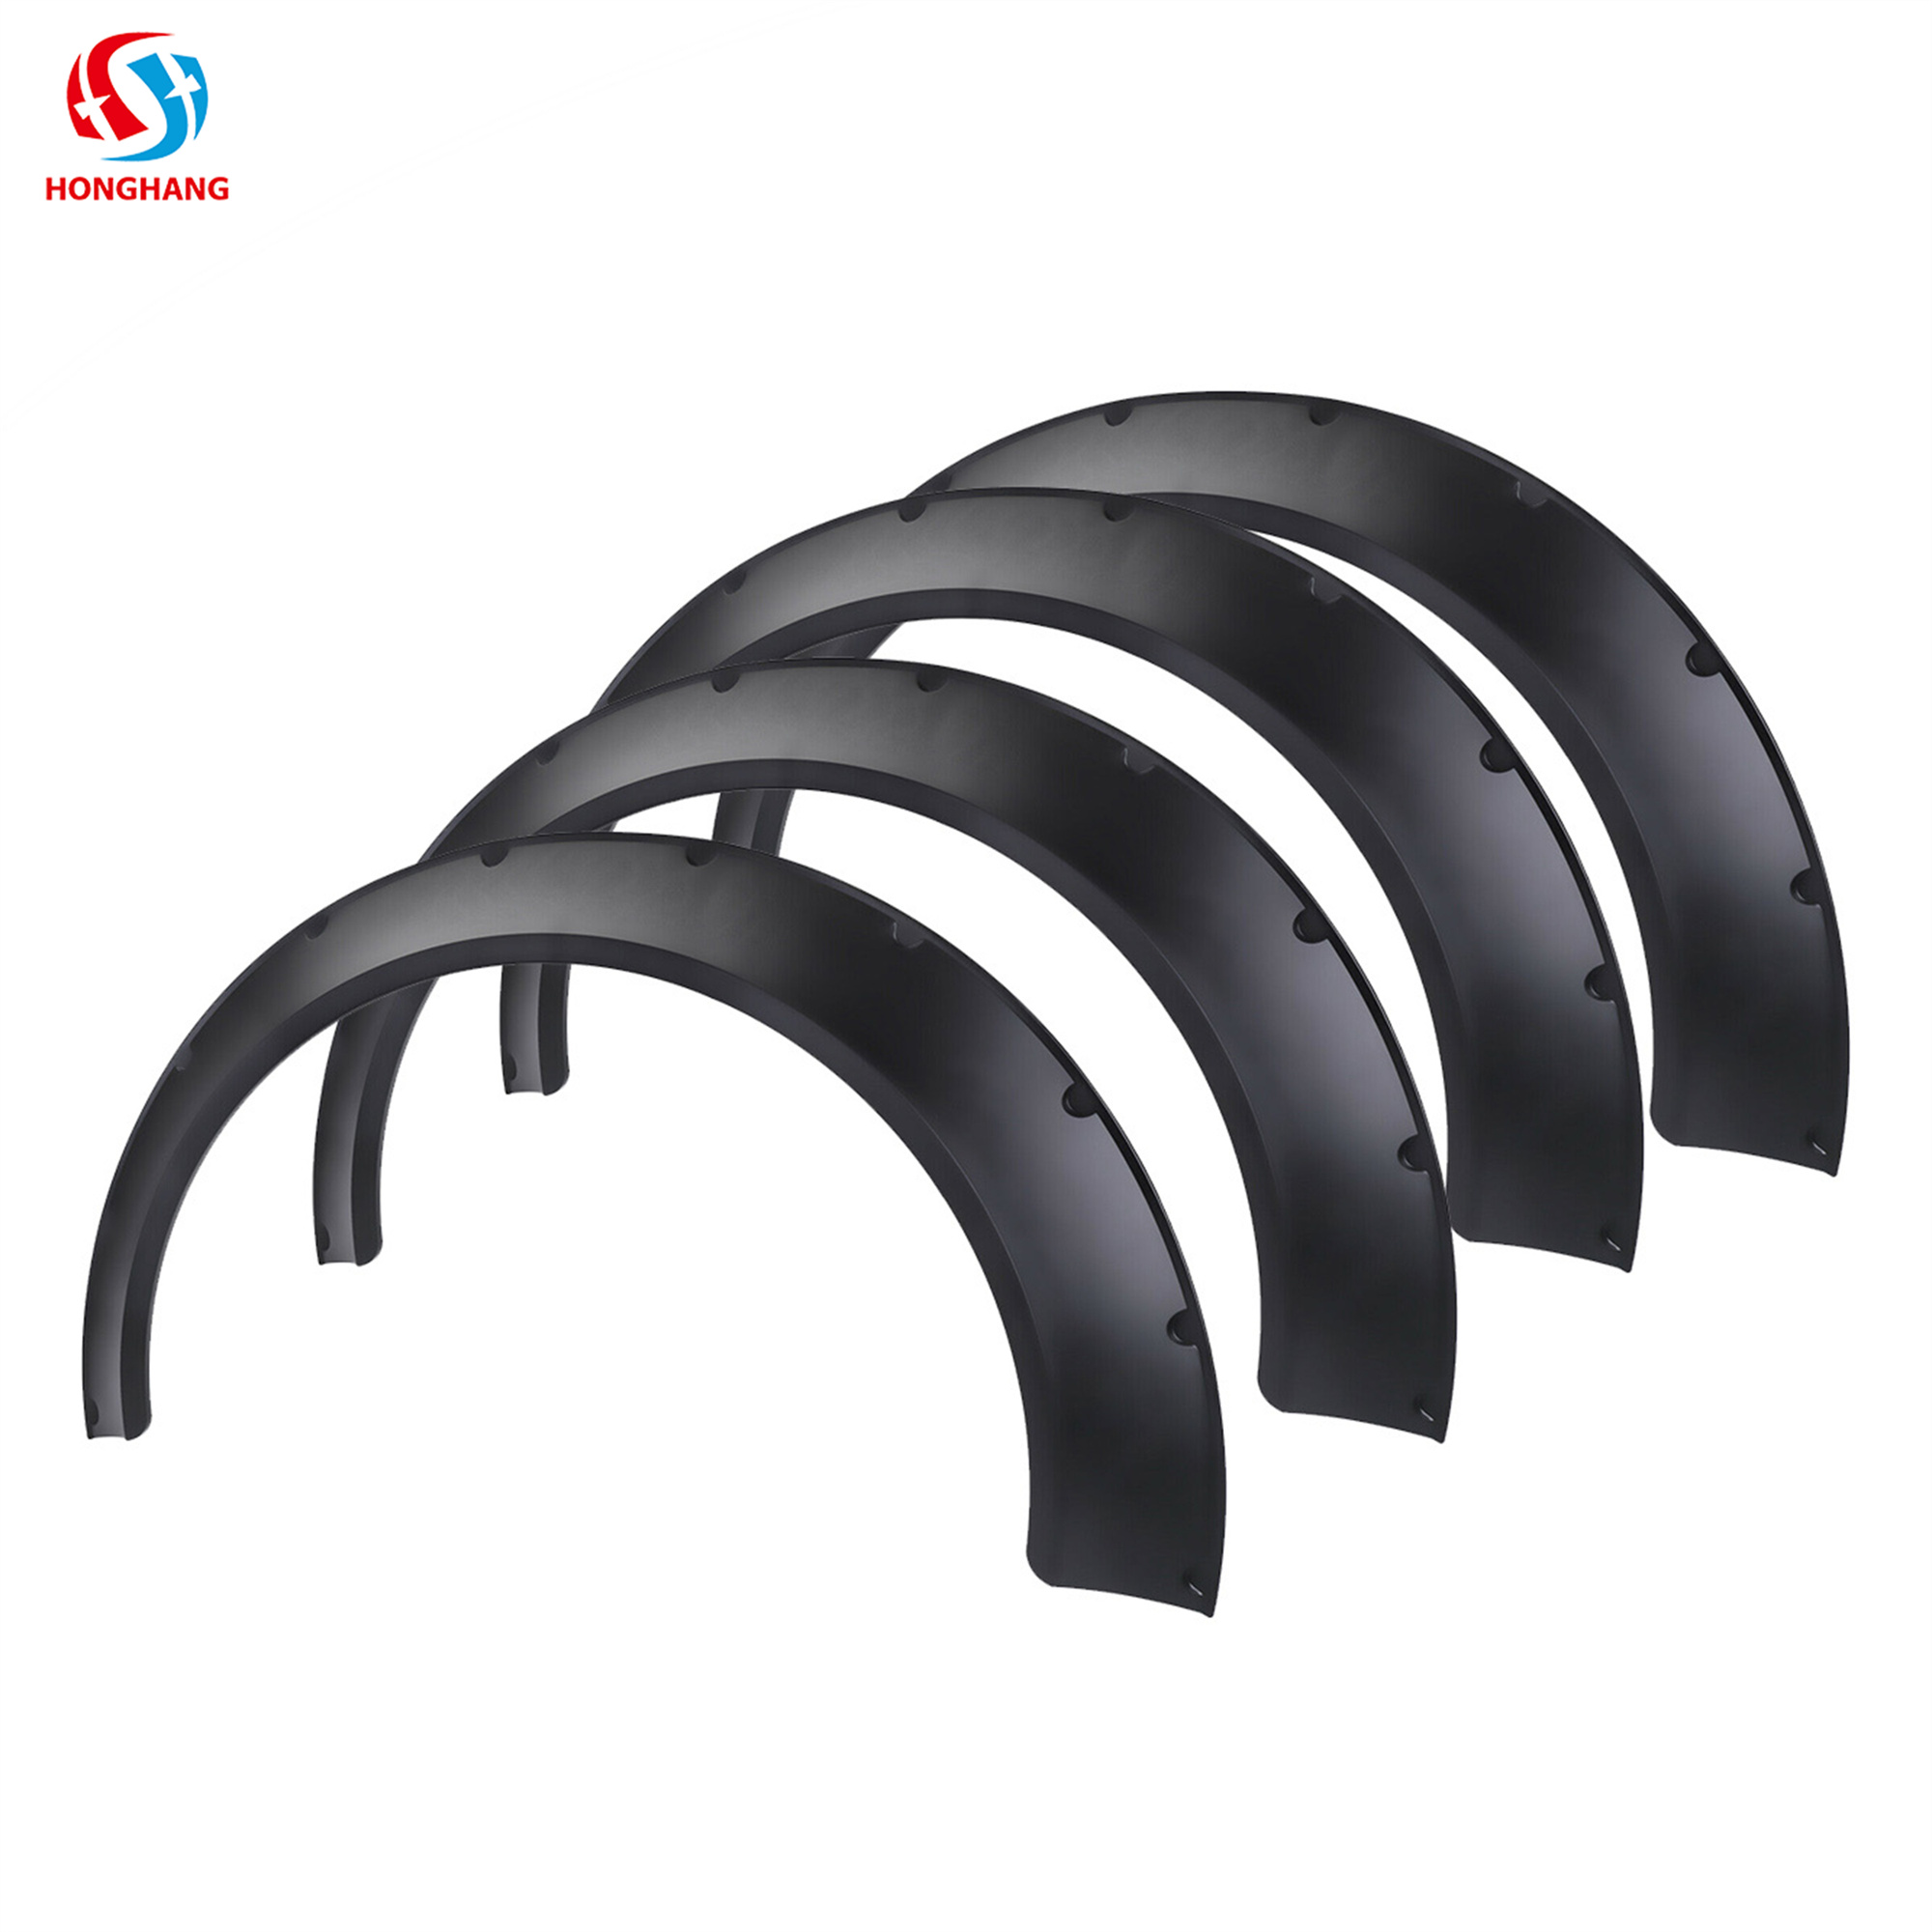 Type B 4pcs/set Small Size Universal New PP Material Fender Flares For All Sedan Cars 